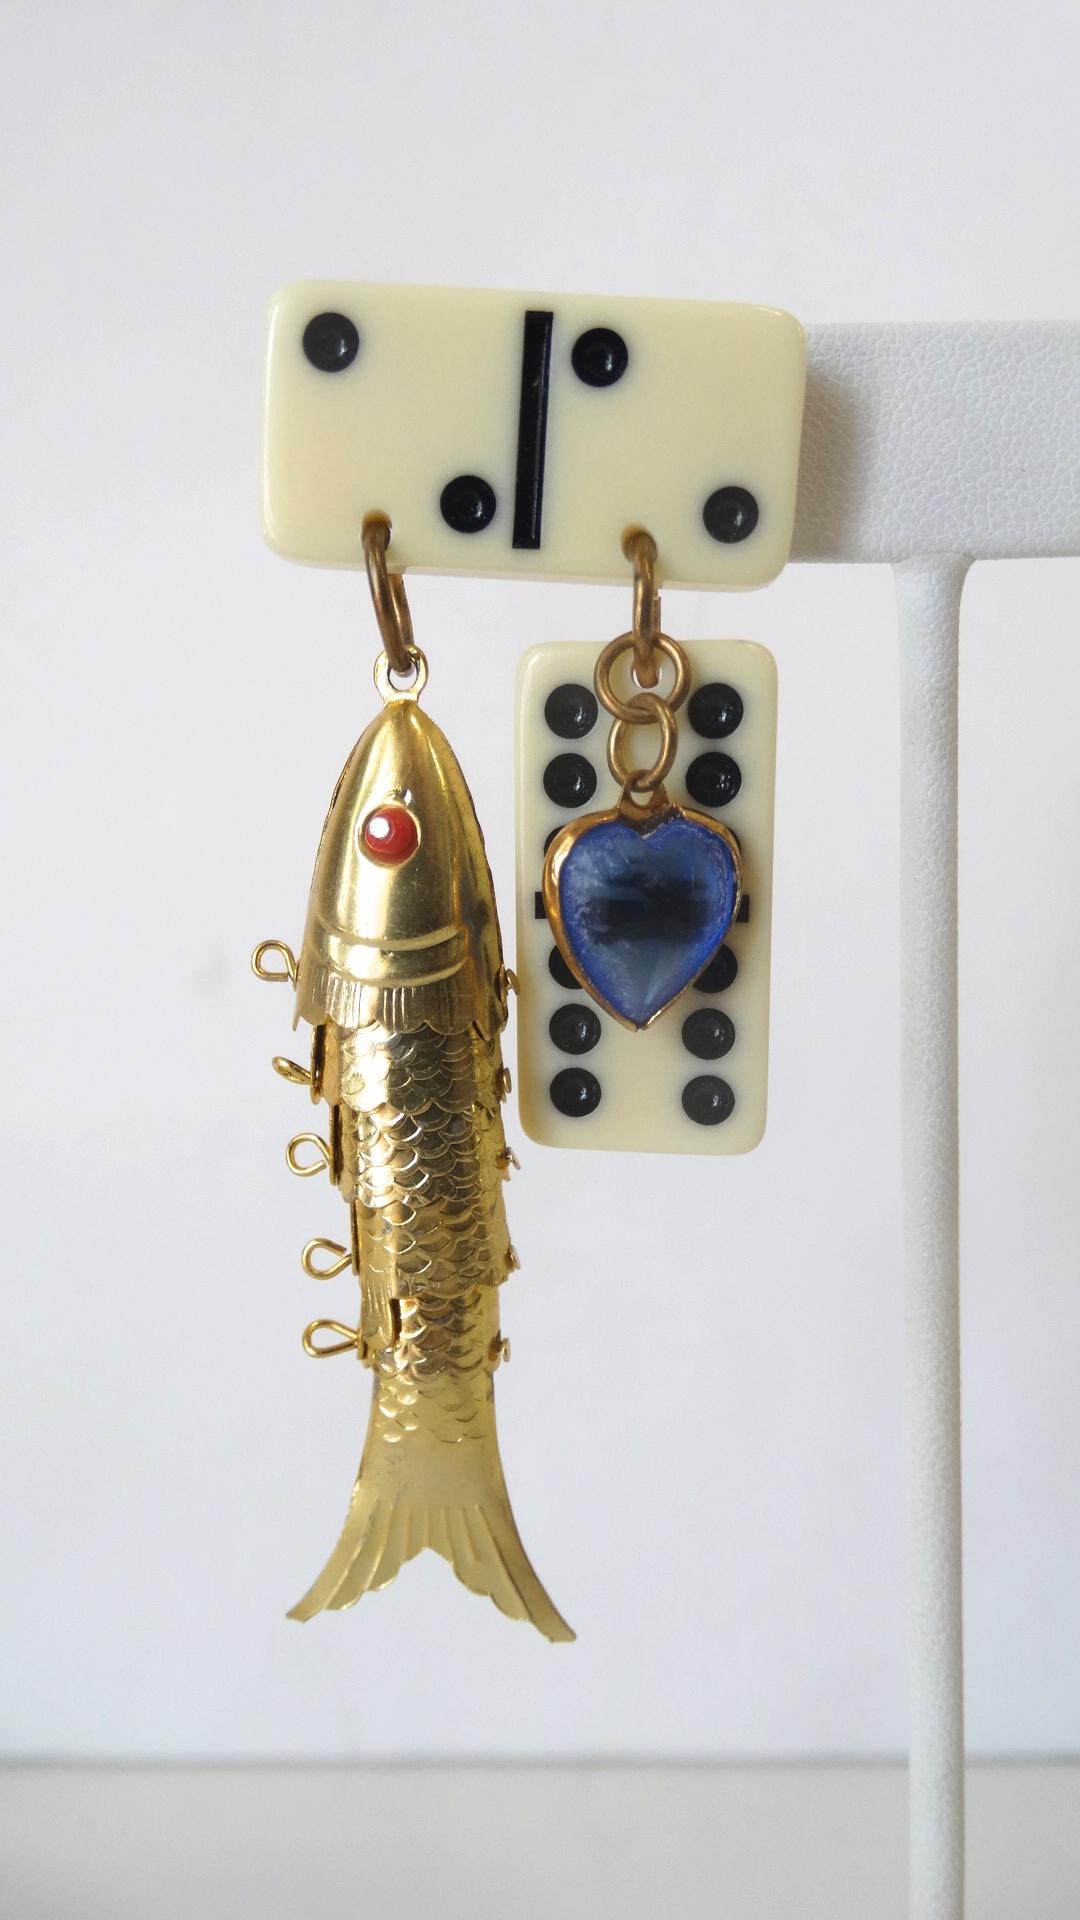 The Most Amazing Earrings Are Here! Circa 1980s, these dangle earrings feature mini dominos, a blue heart charm and a gold plated moveable Chinese fish pendent. The fish pendent includes red eyes and great textural detail. Features pierced backs.